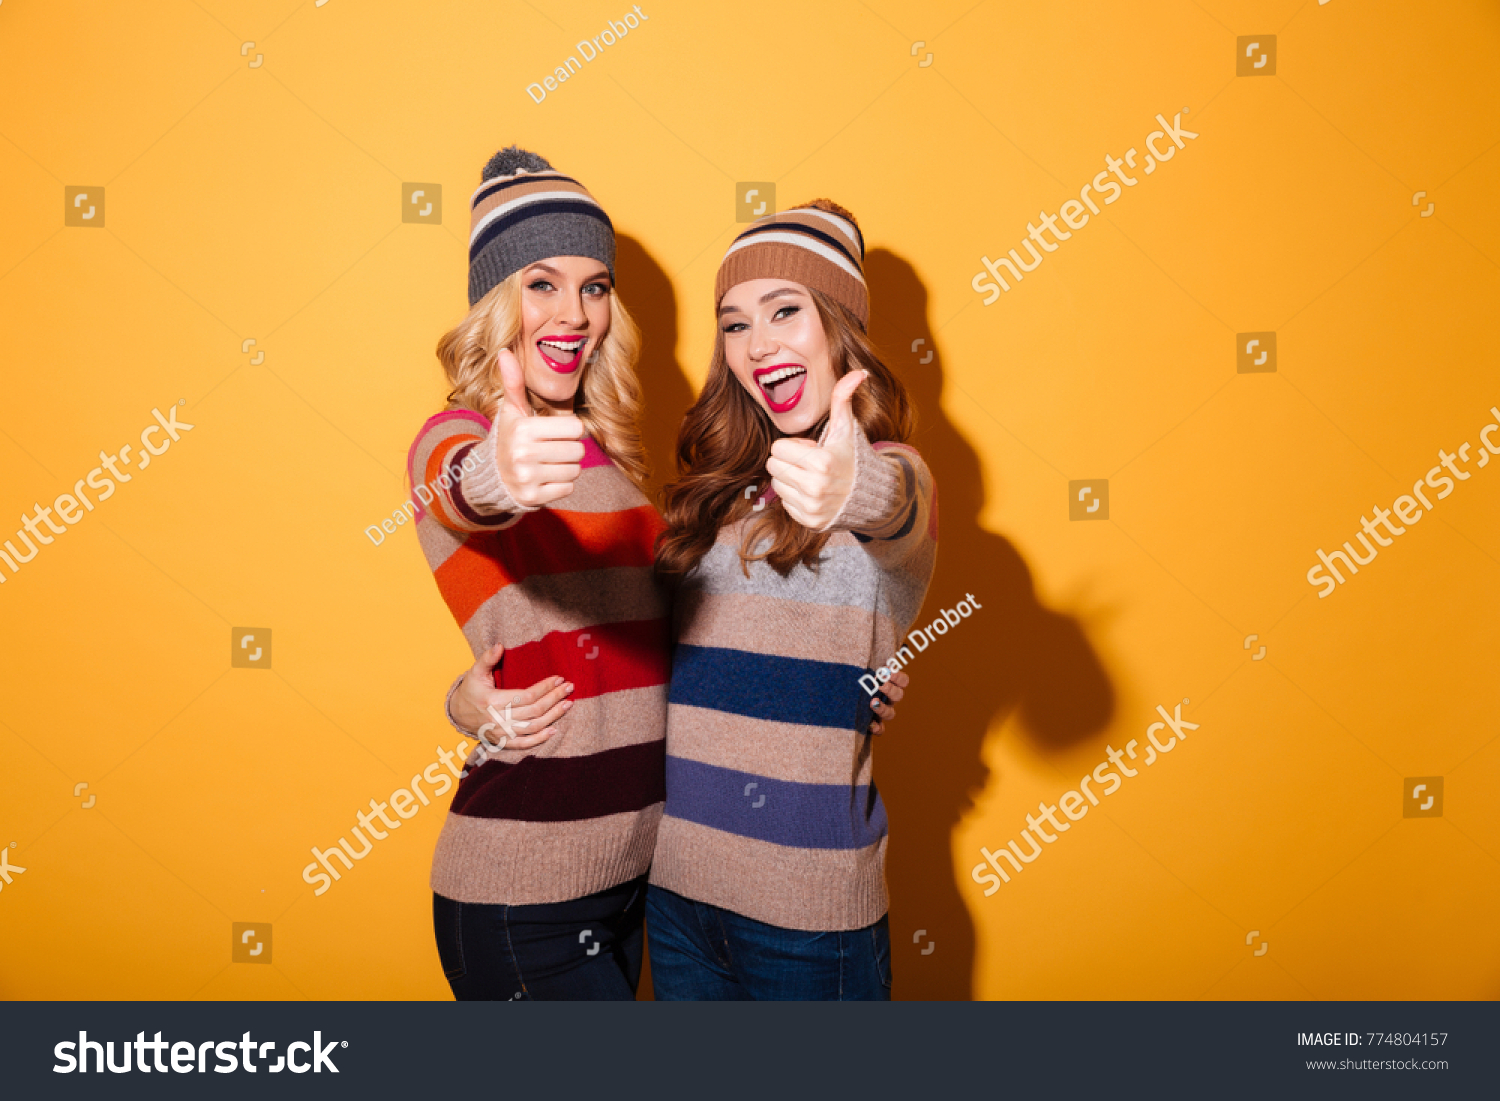 Portrait of two happy girls dressed in winter clothes standing and showing thumbs up gesture isolated over yellow background #774804157